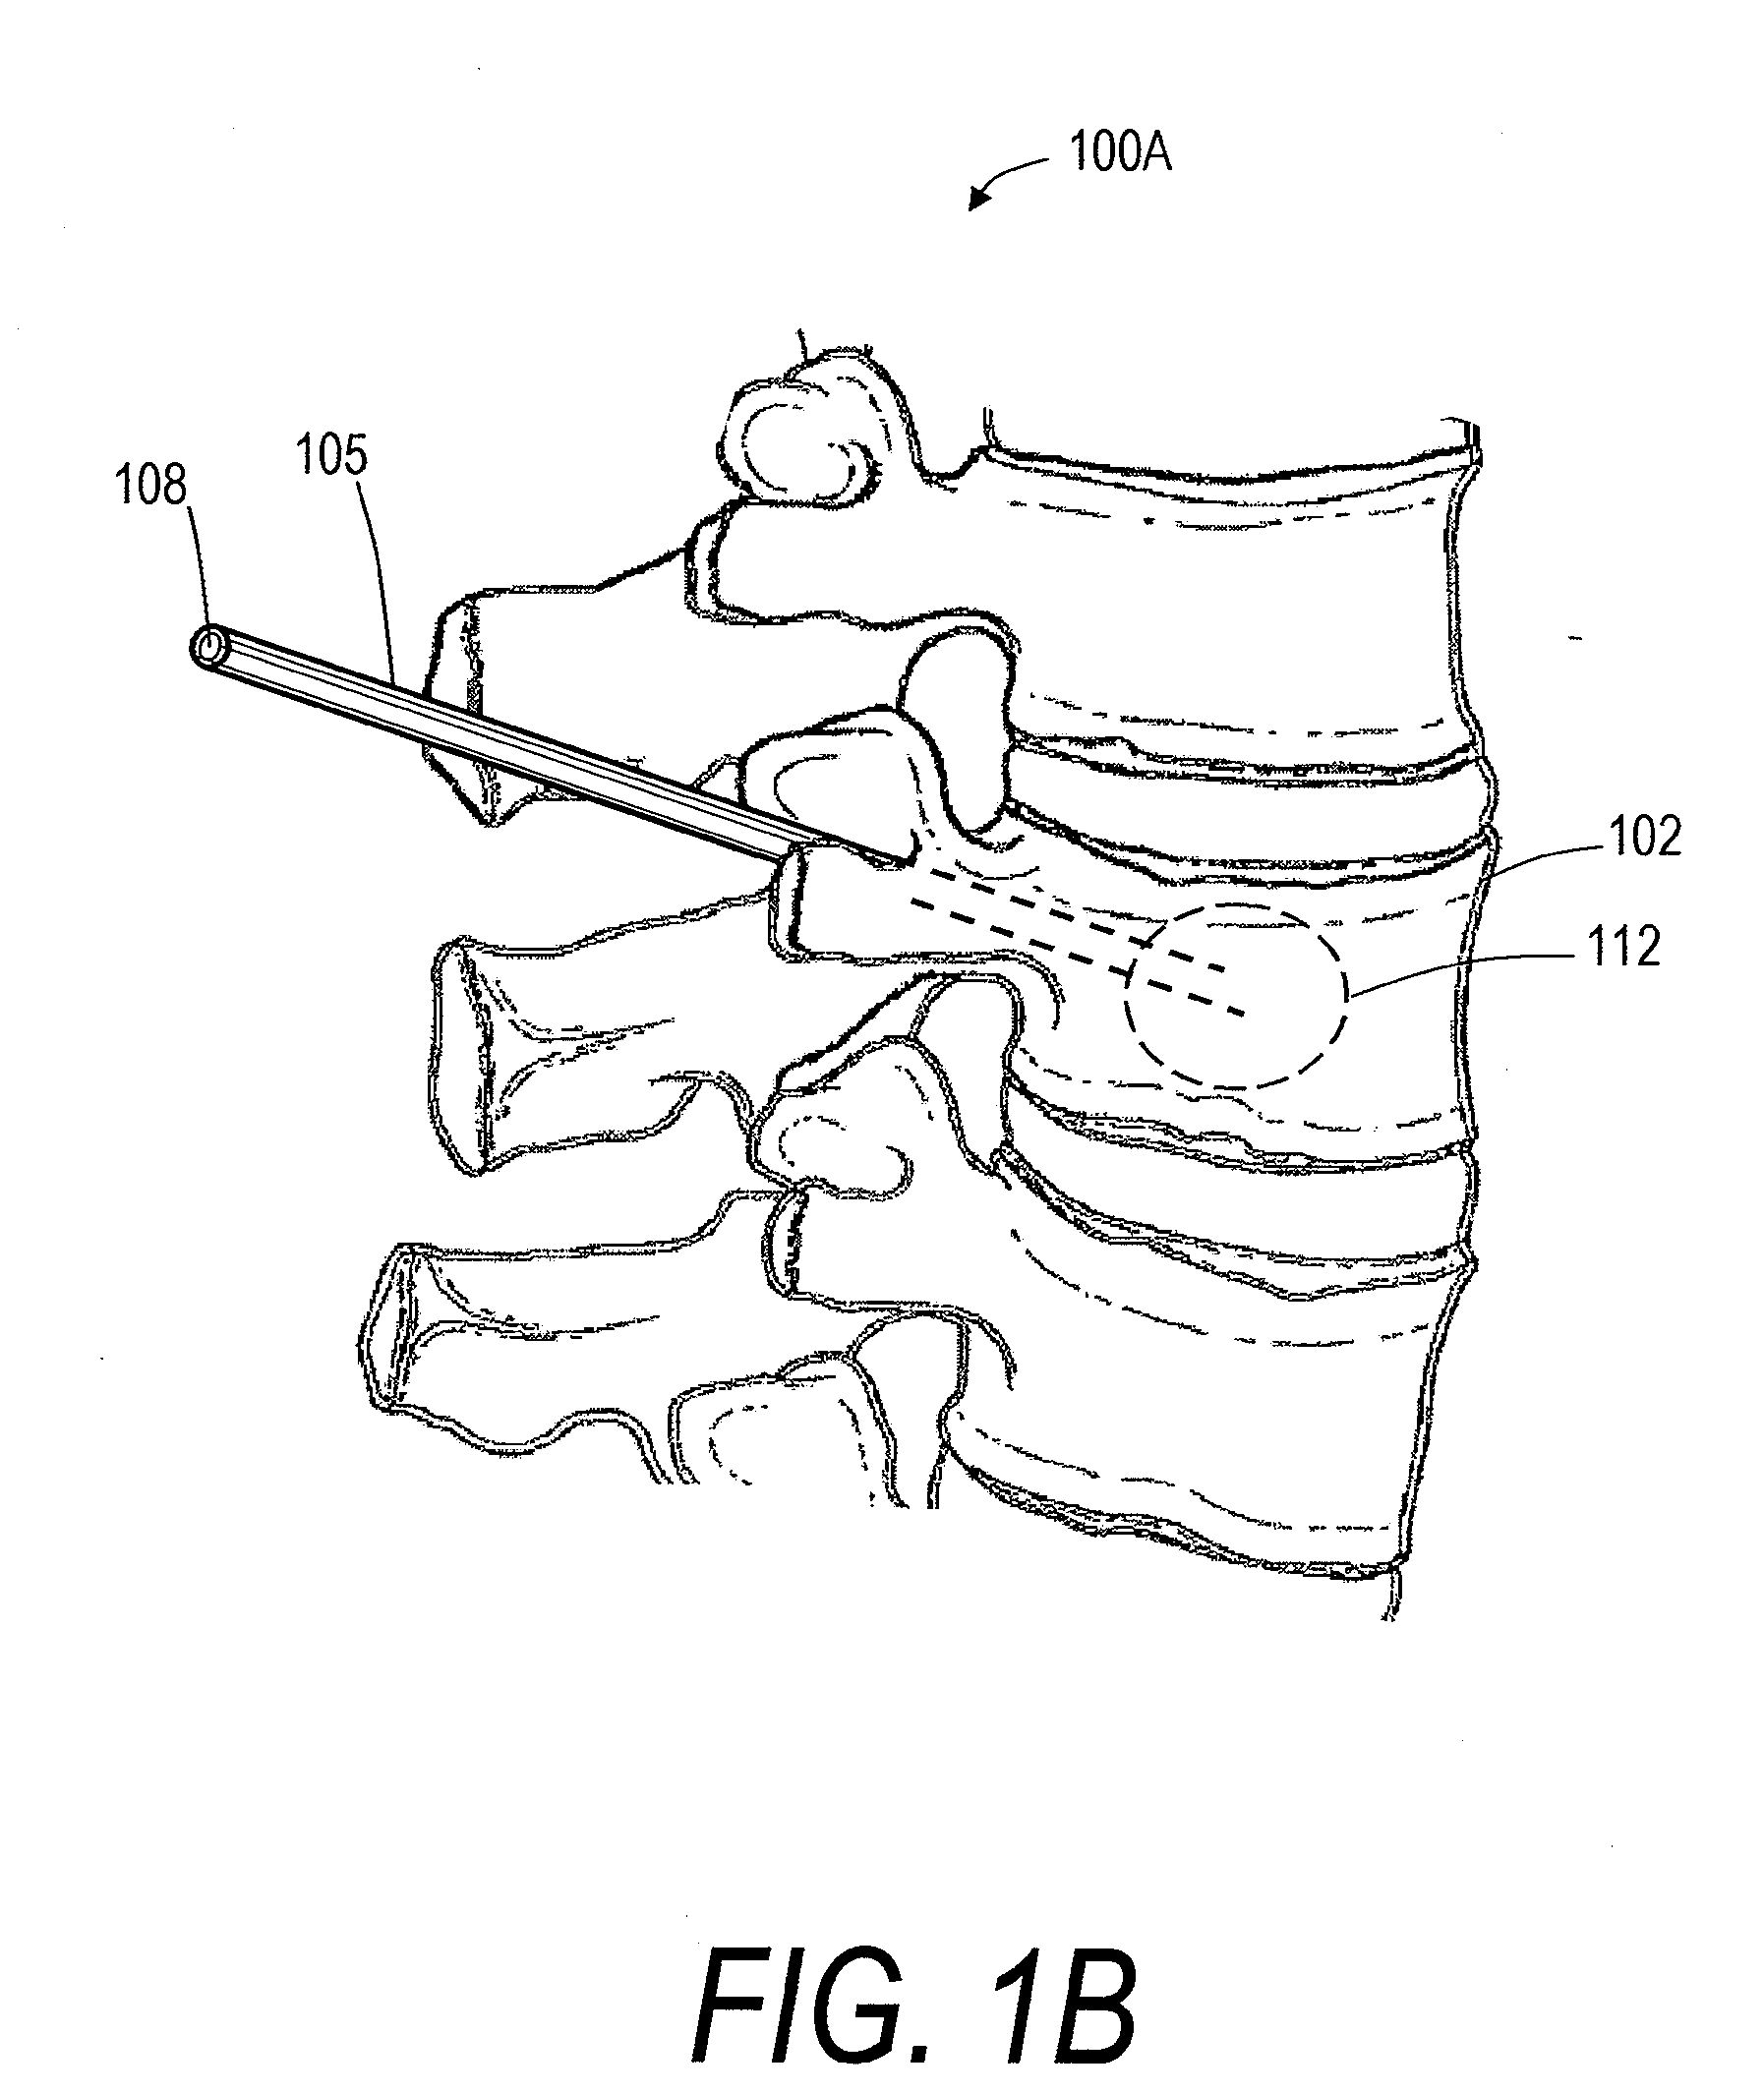 Systems for treating bone